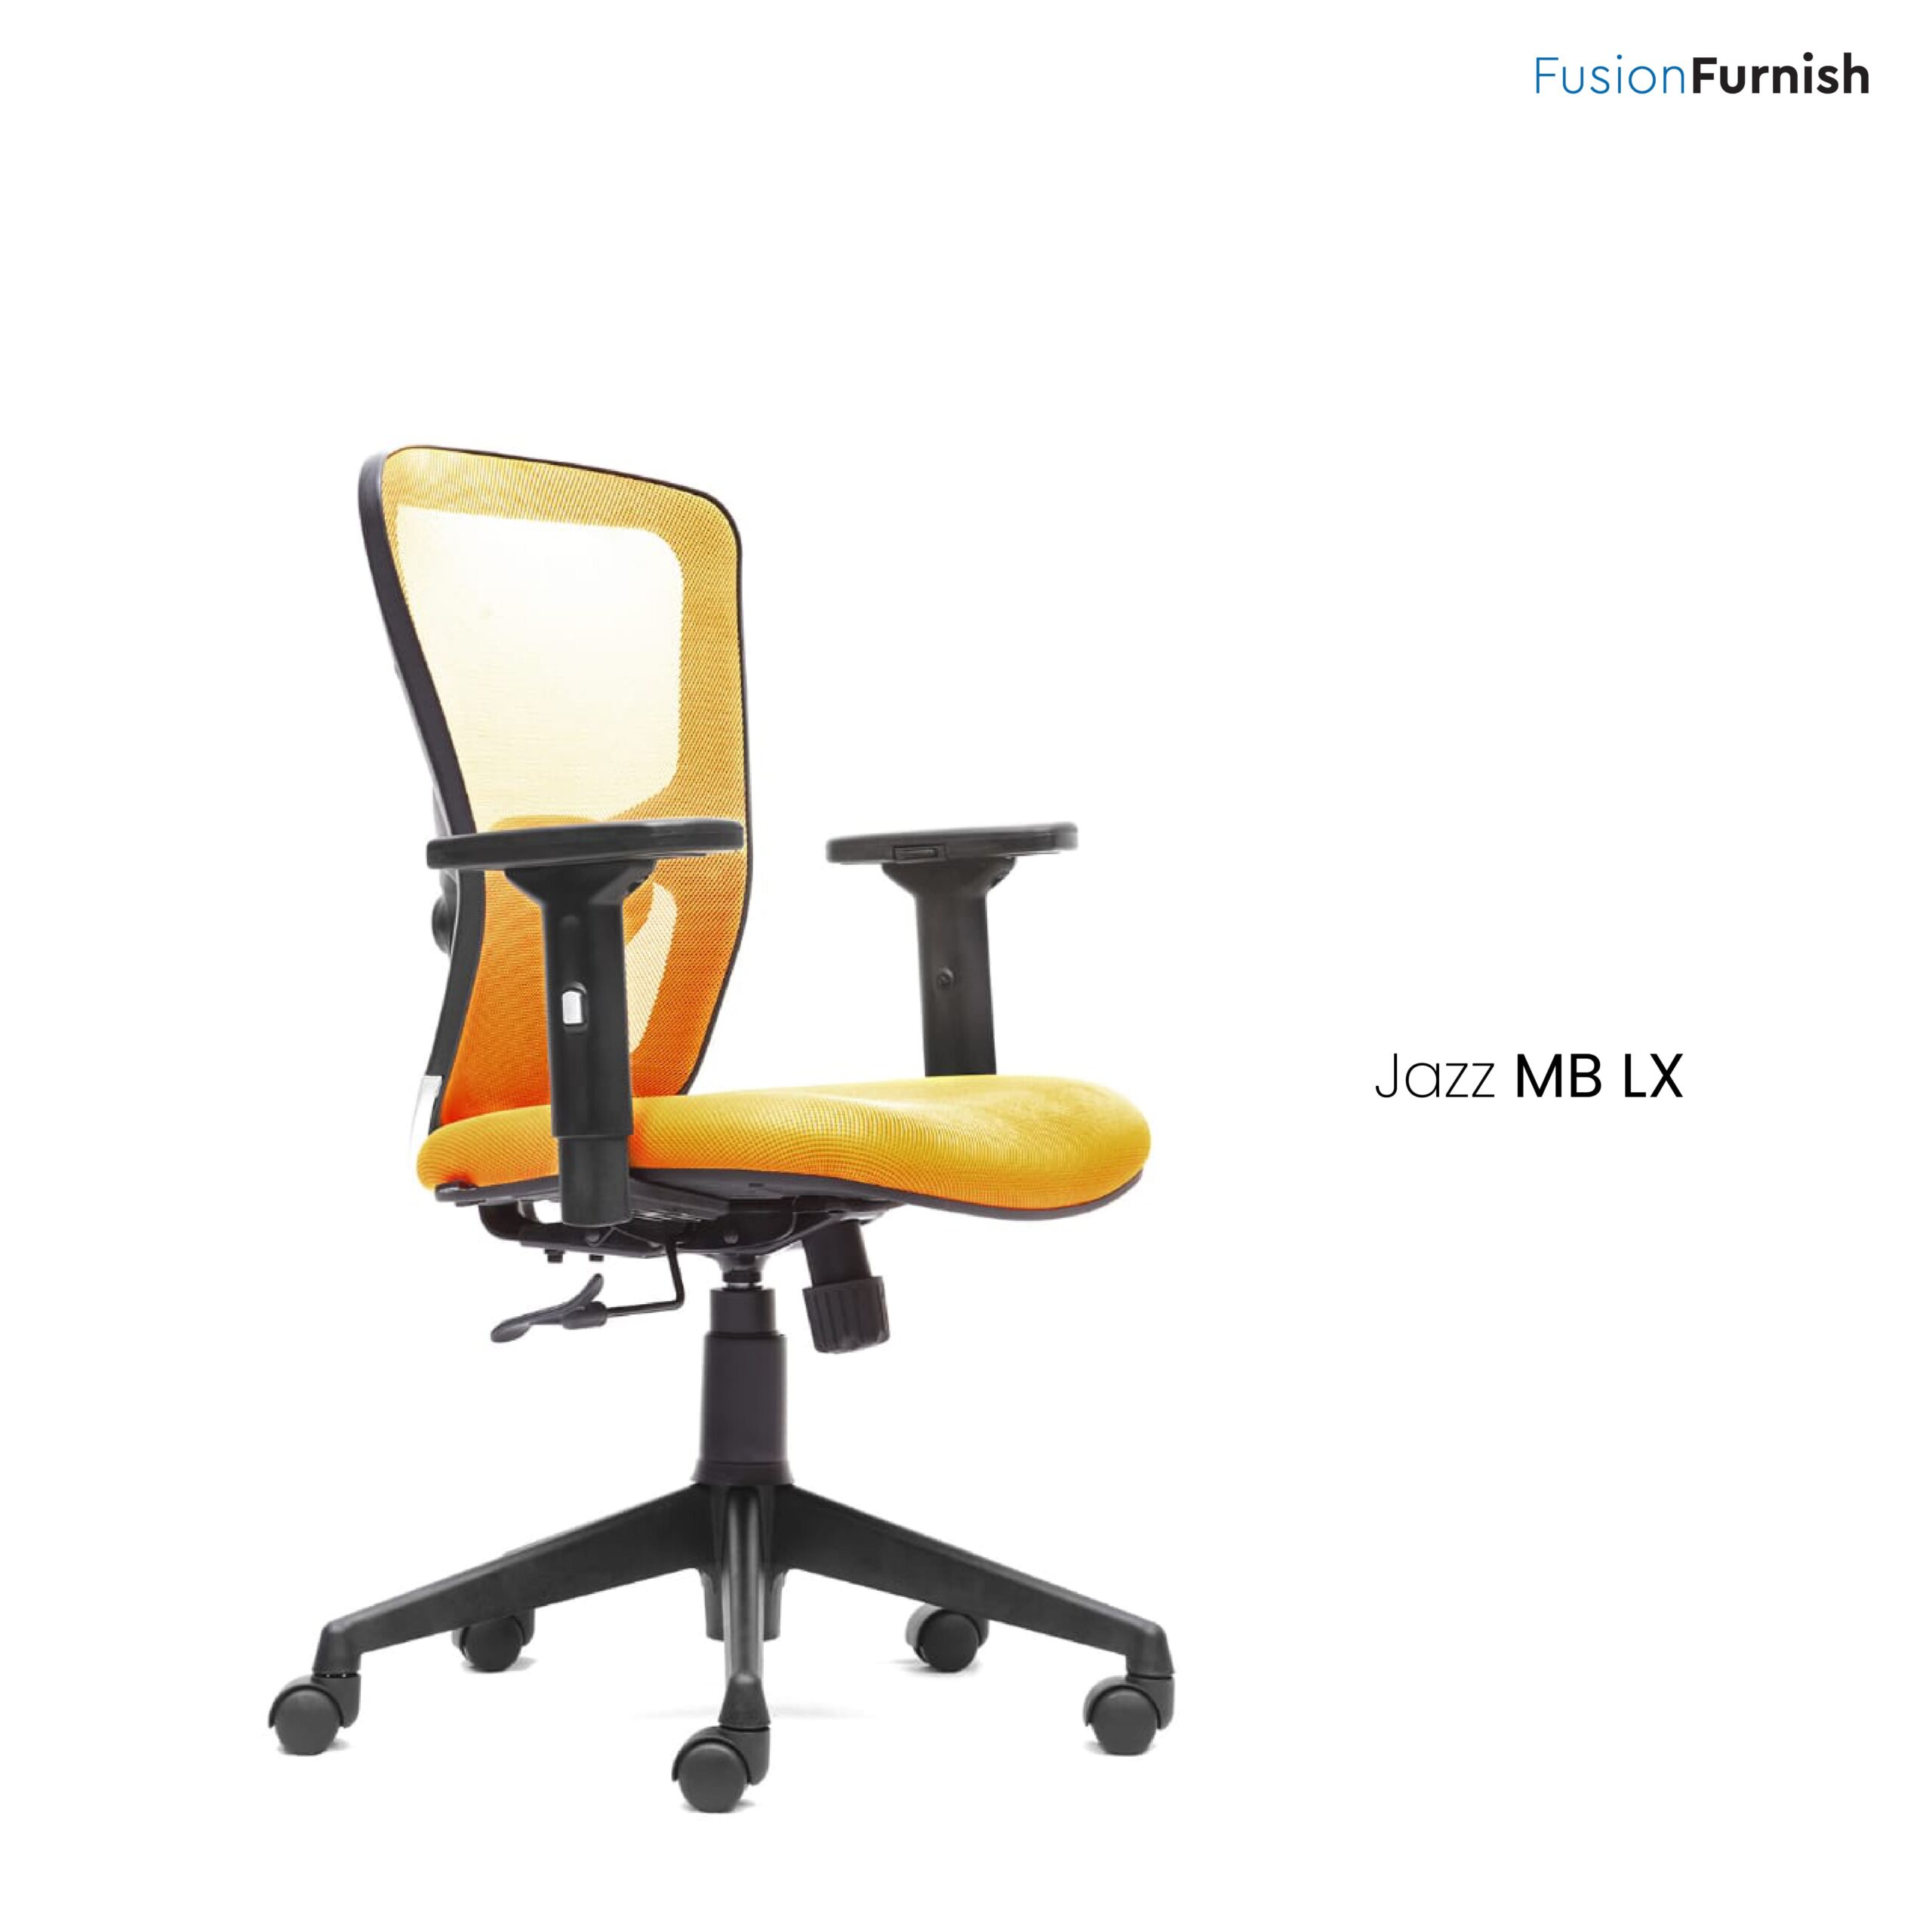 JAZZ MB LXOur Jazz series of desk chairs are specially designed to give lumbar support, and an adjustable armrest and brake mechanism offer utmost comfort and stability even when you need to work nonstop.